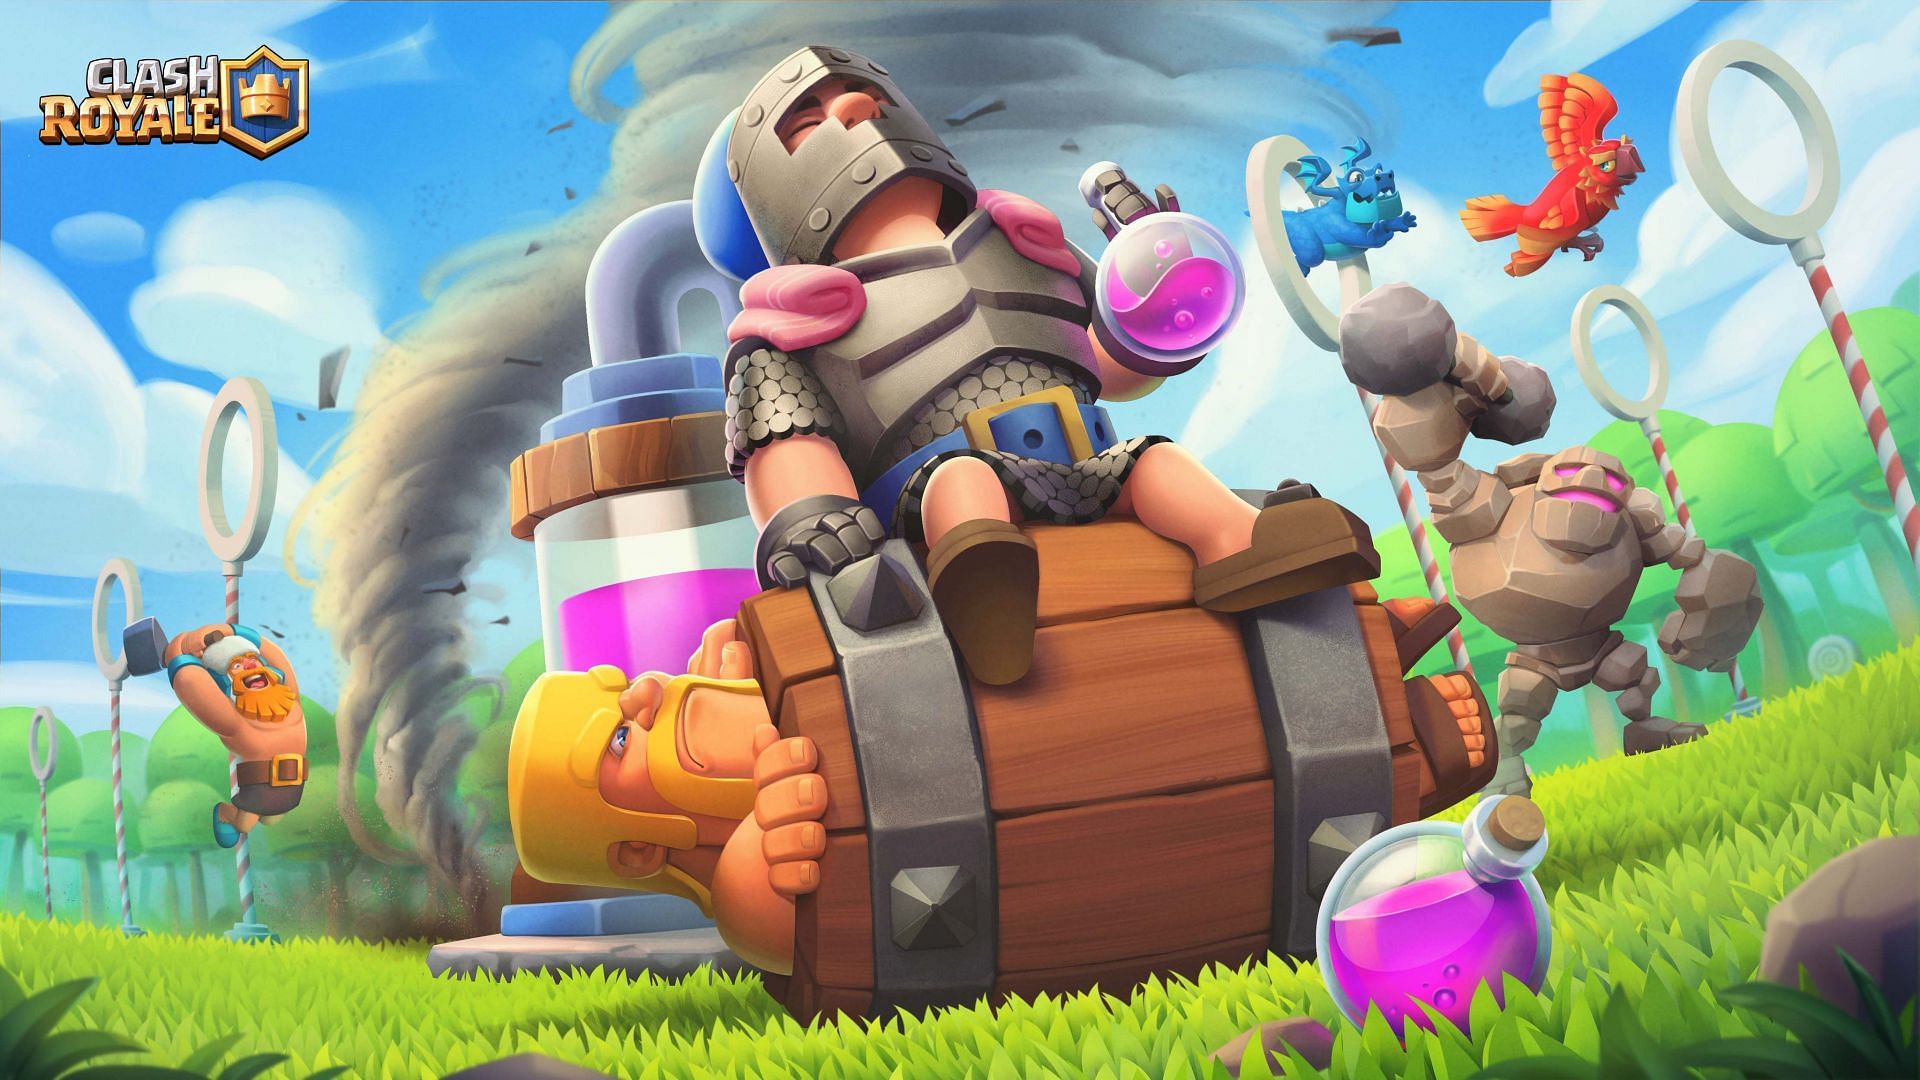 Tips to increase your win rate in Clash Royale